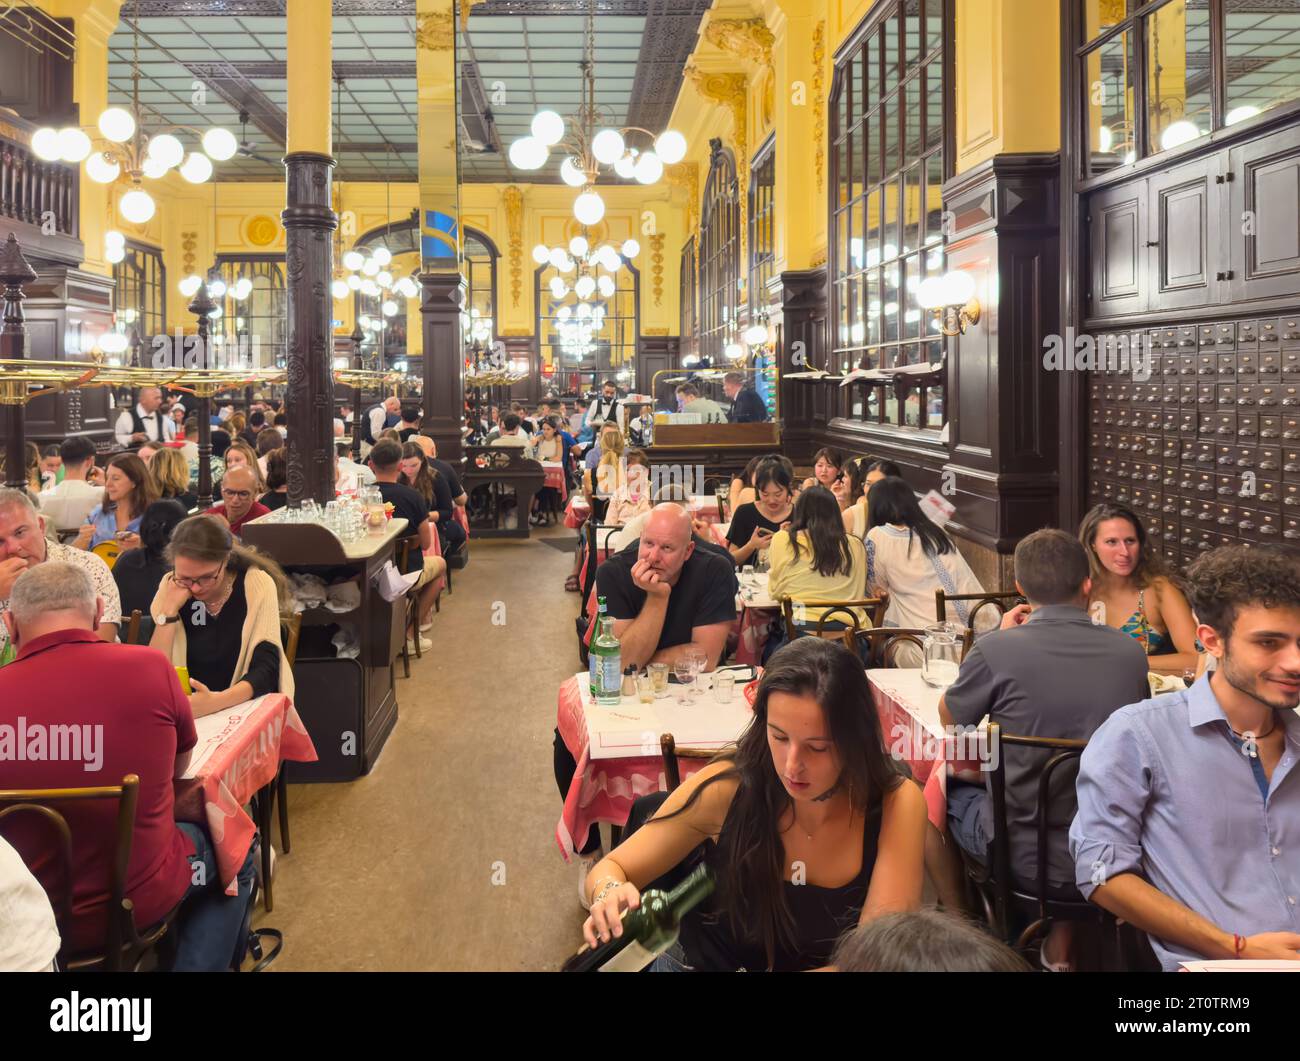 Diners enjoy traditional French cuisine at the historic Art Nouveau style Bouillon Chartier restaurant, in the Grands Boulevards district of Paris, Fr Stock Photo